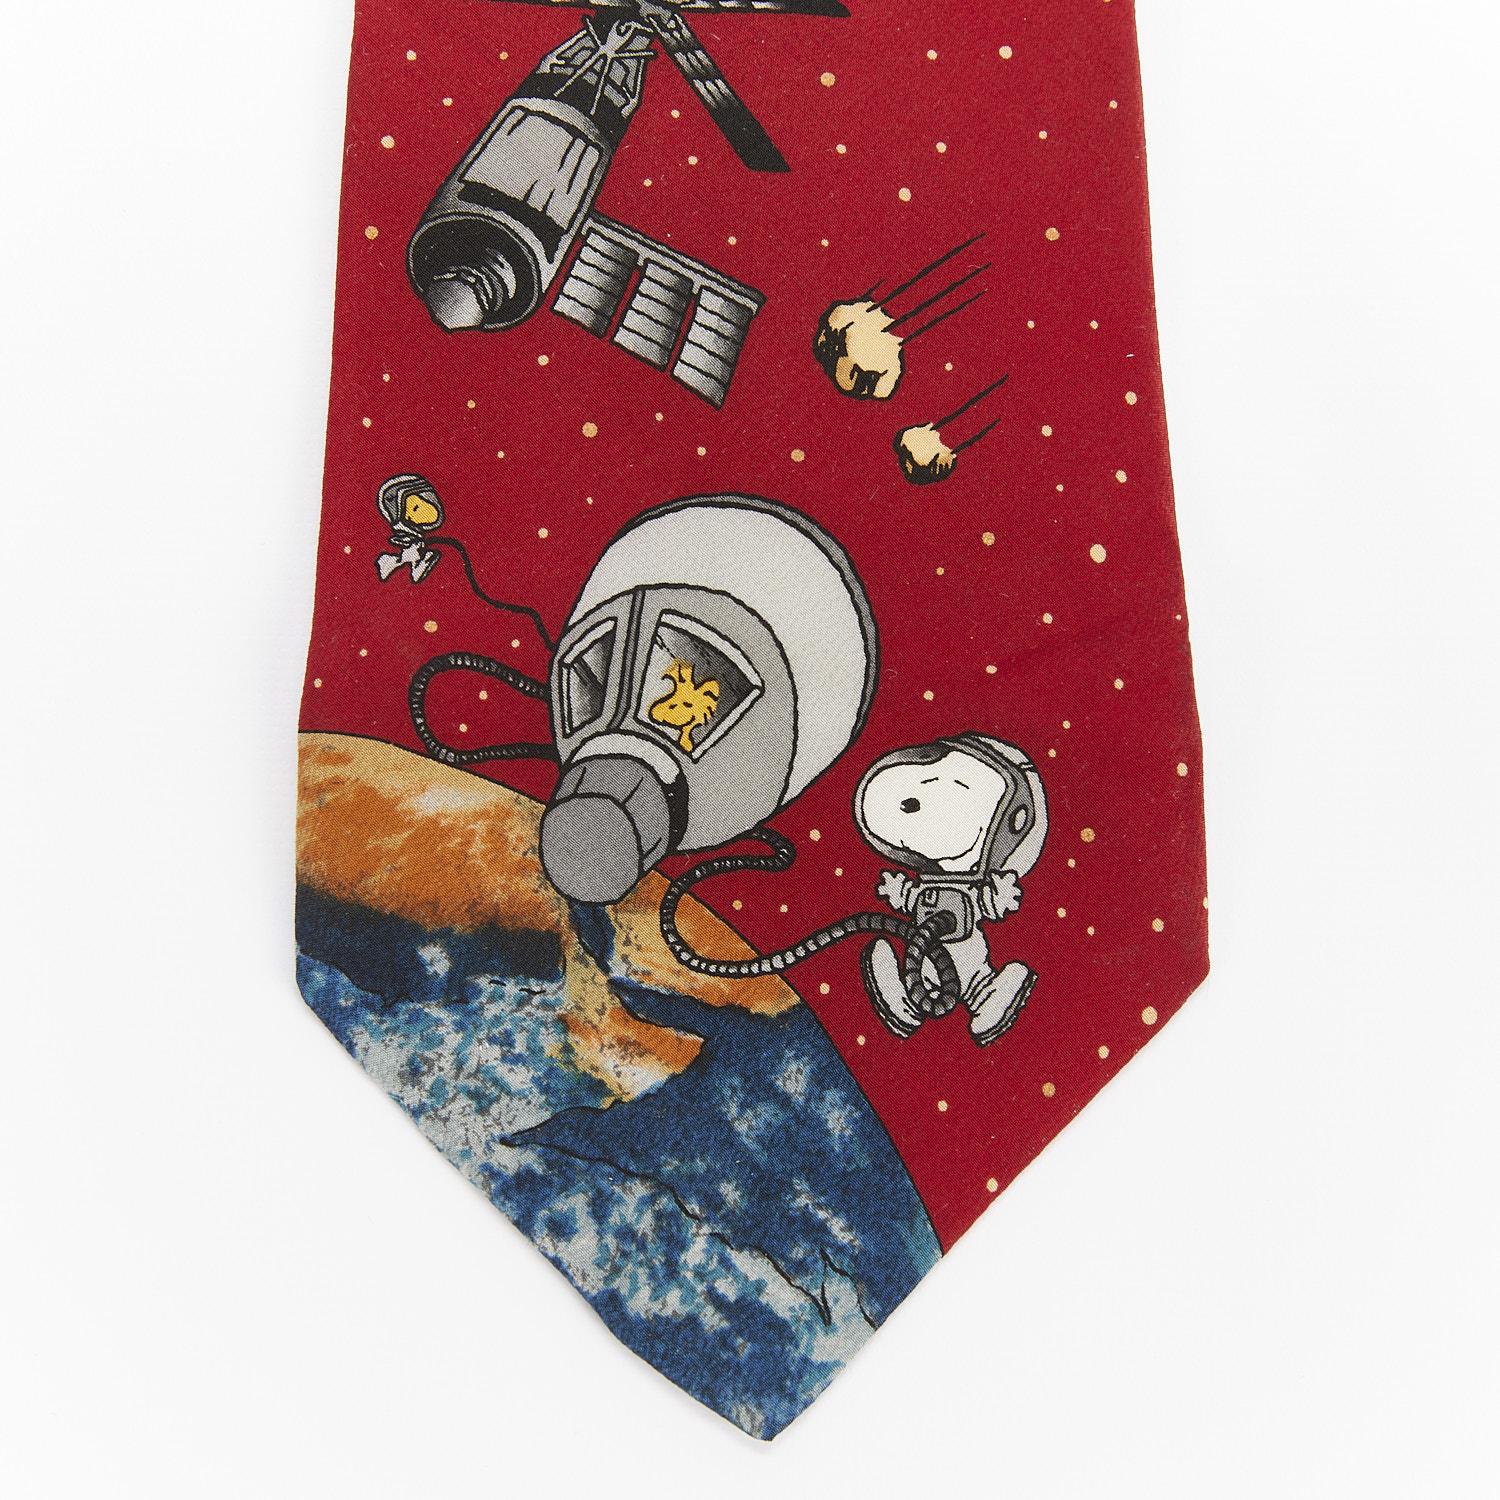 3 Ties of Snoopy - Striped & Space Themed - Image 4 of 10